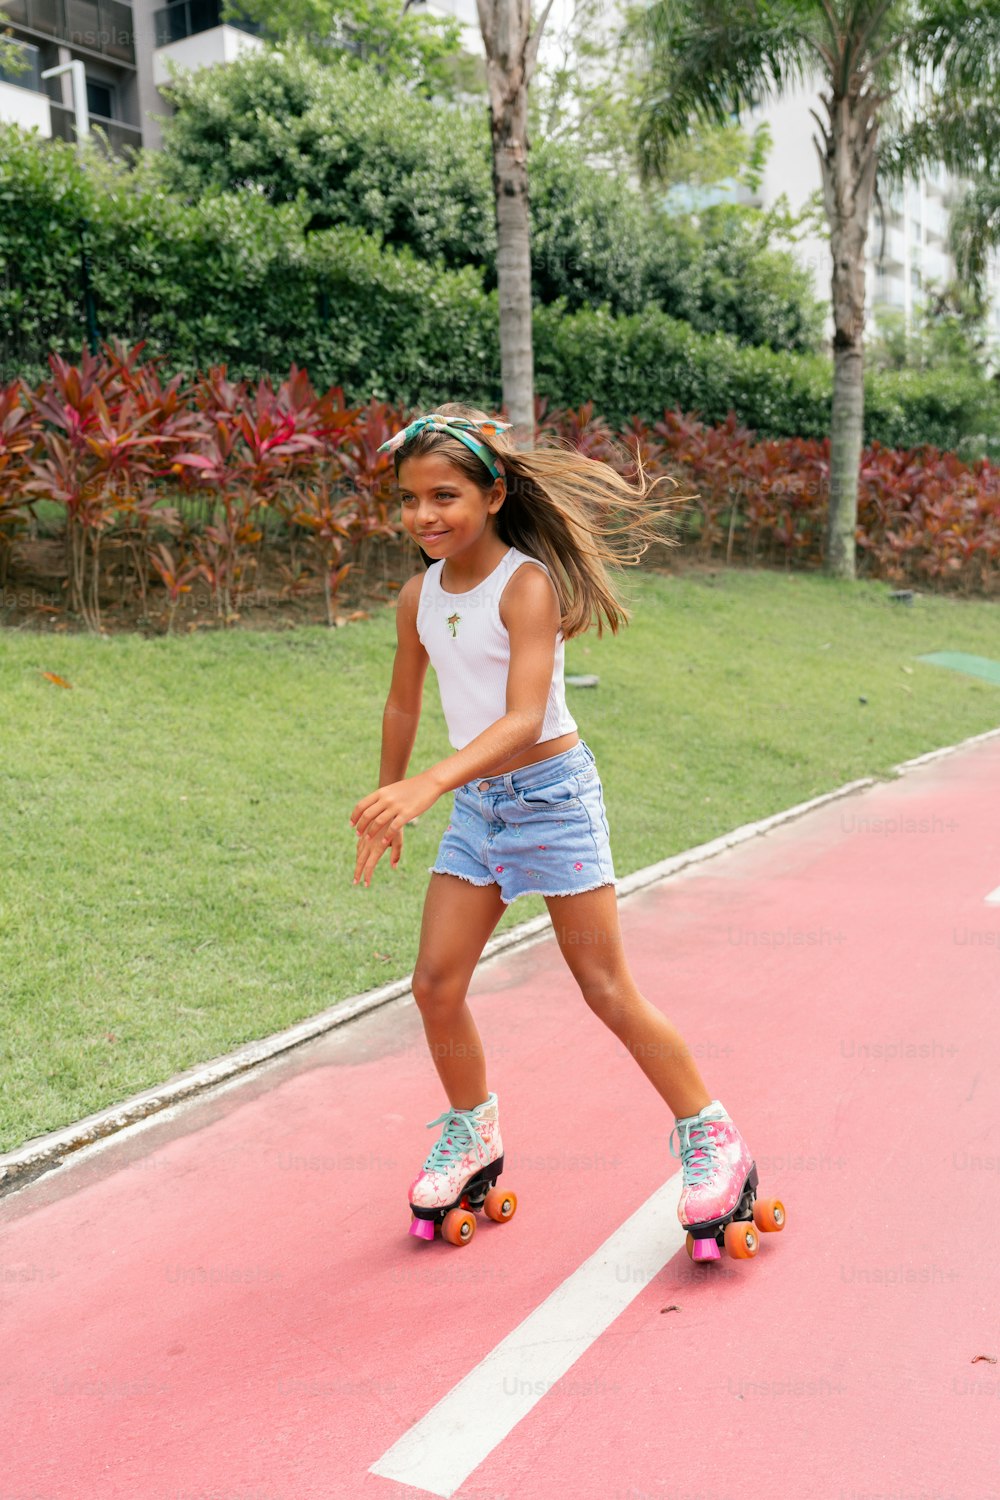 a young girl riding a skateboard on a pink surface